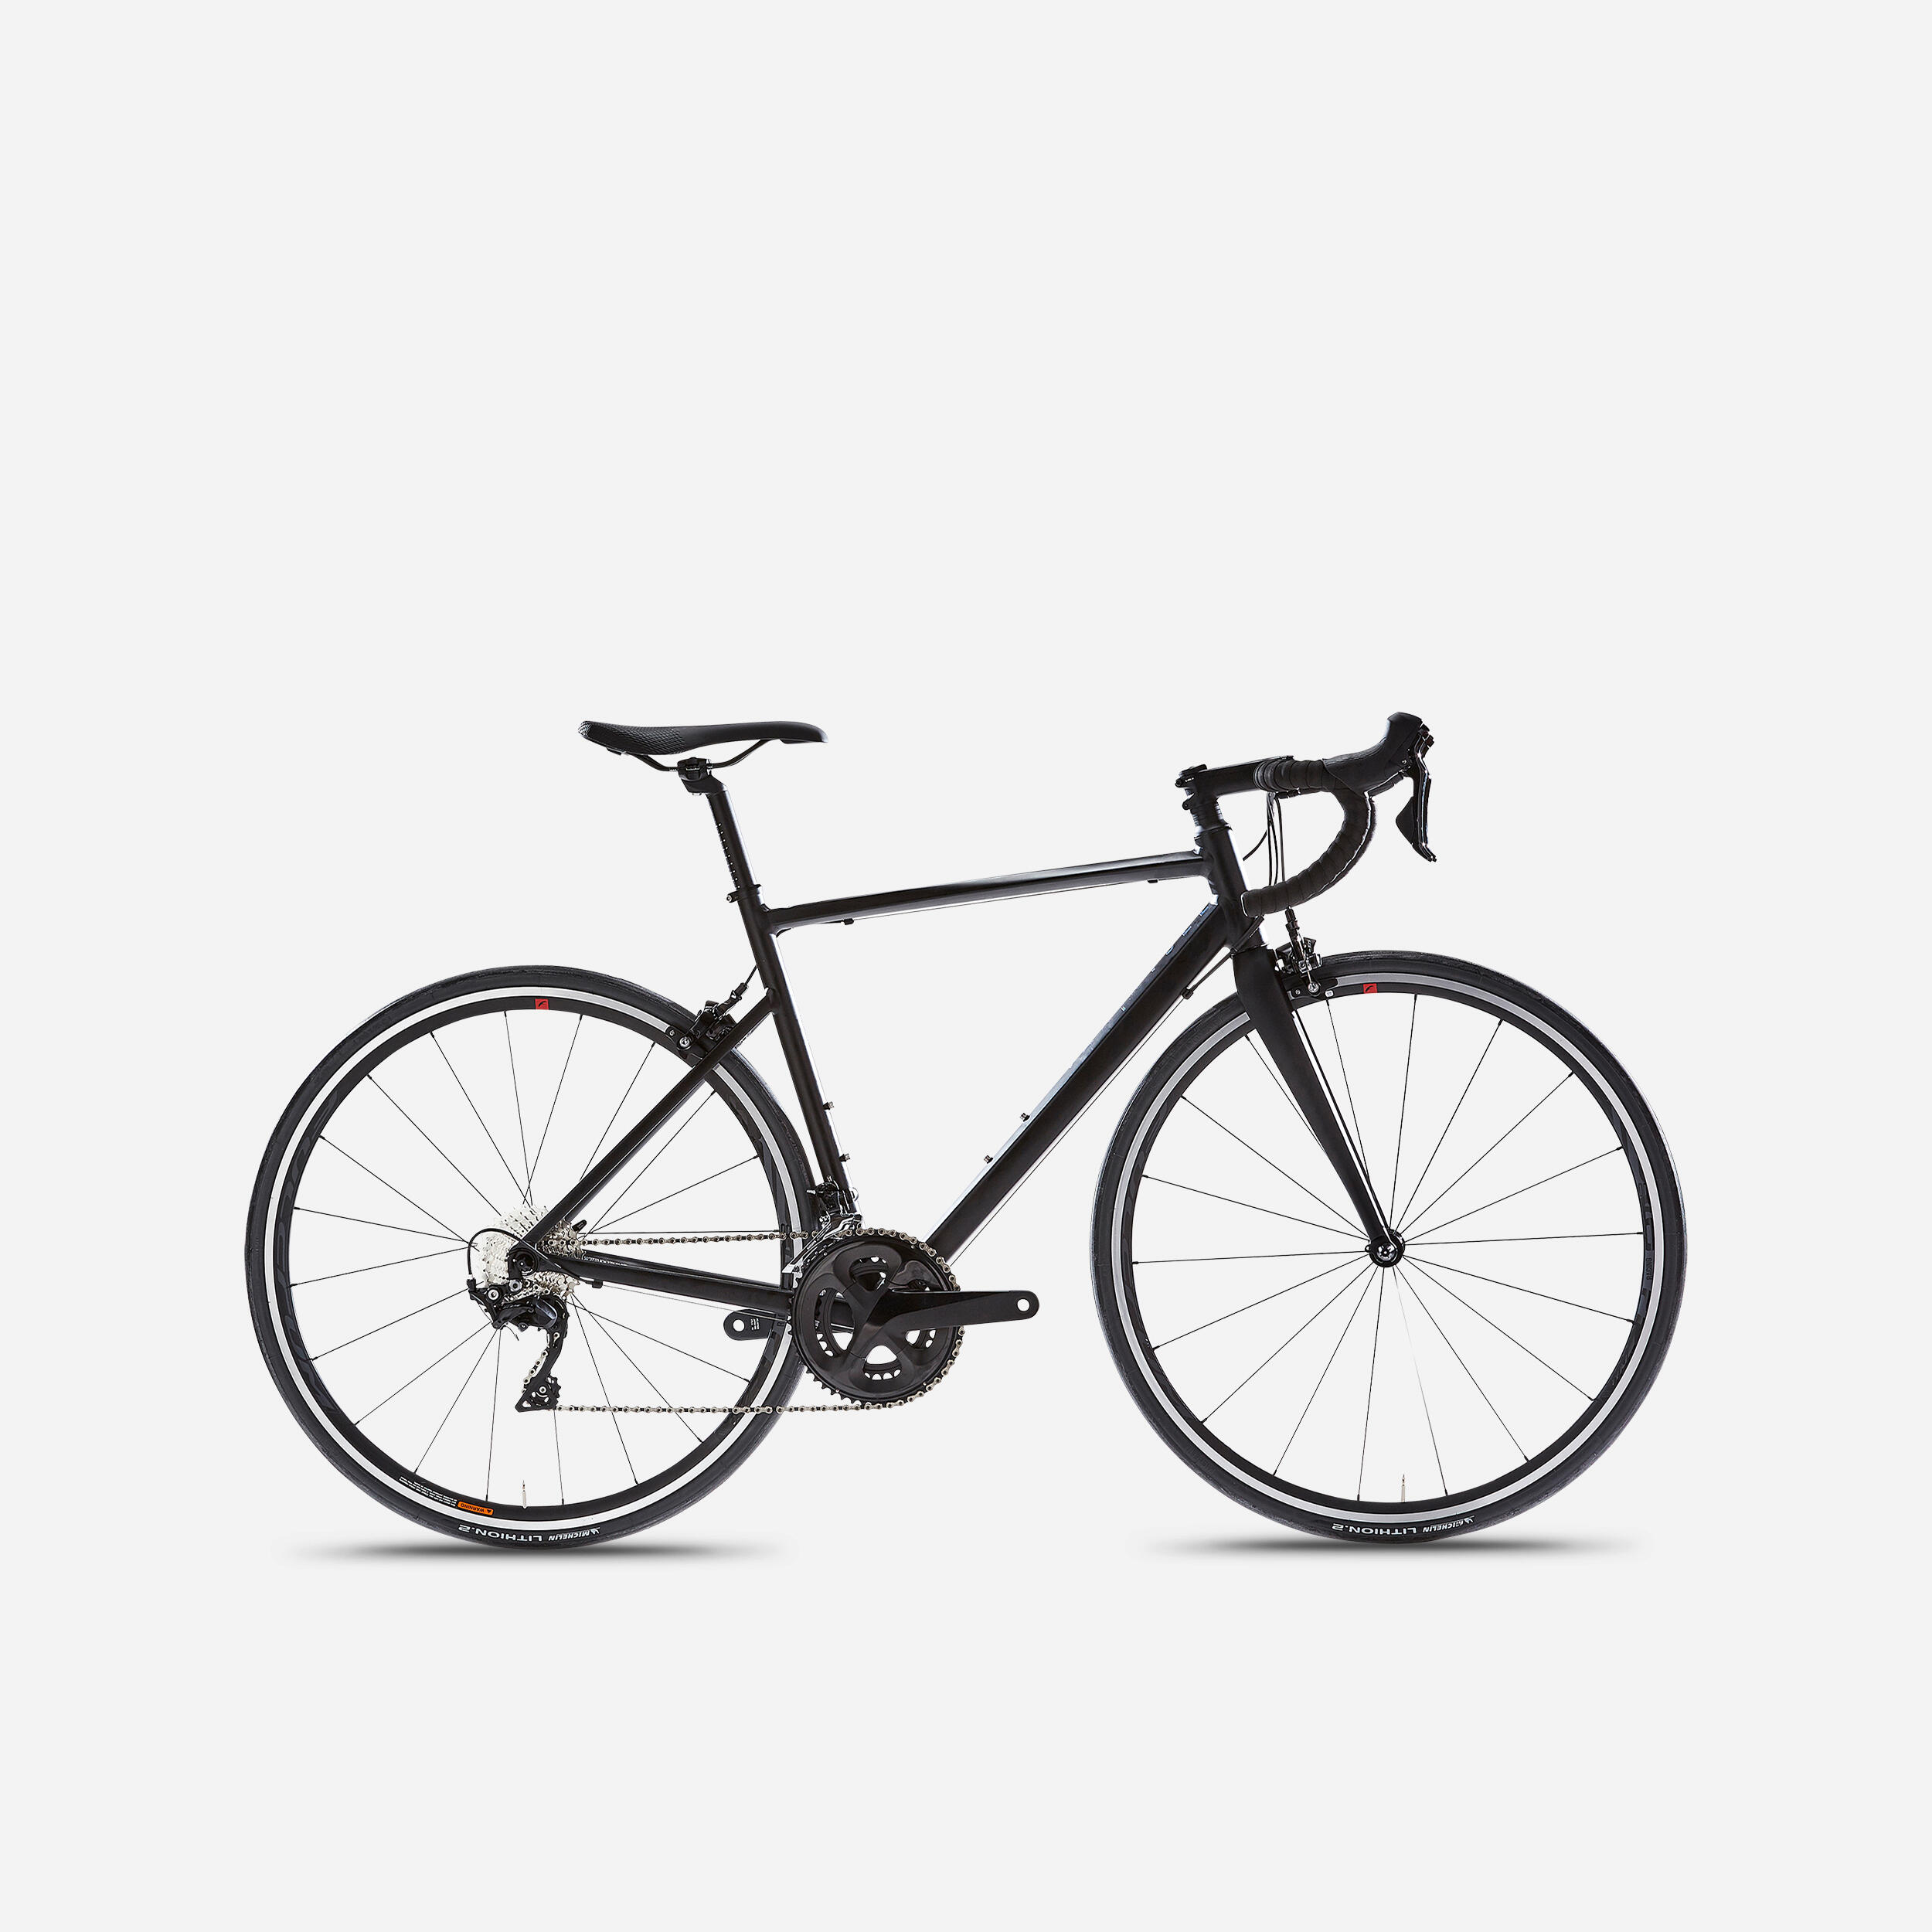 A Van Rysel with a titanium frame, carbon inserts and integrated bags for  ultra-distance